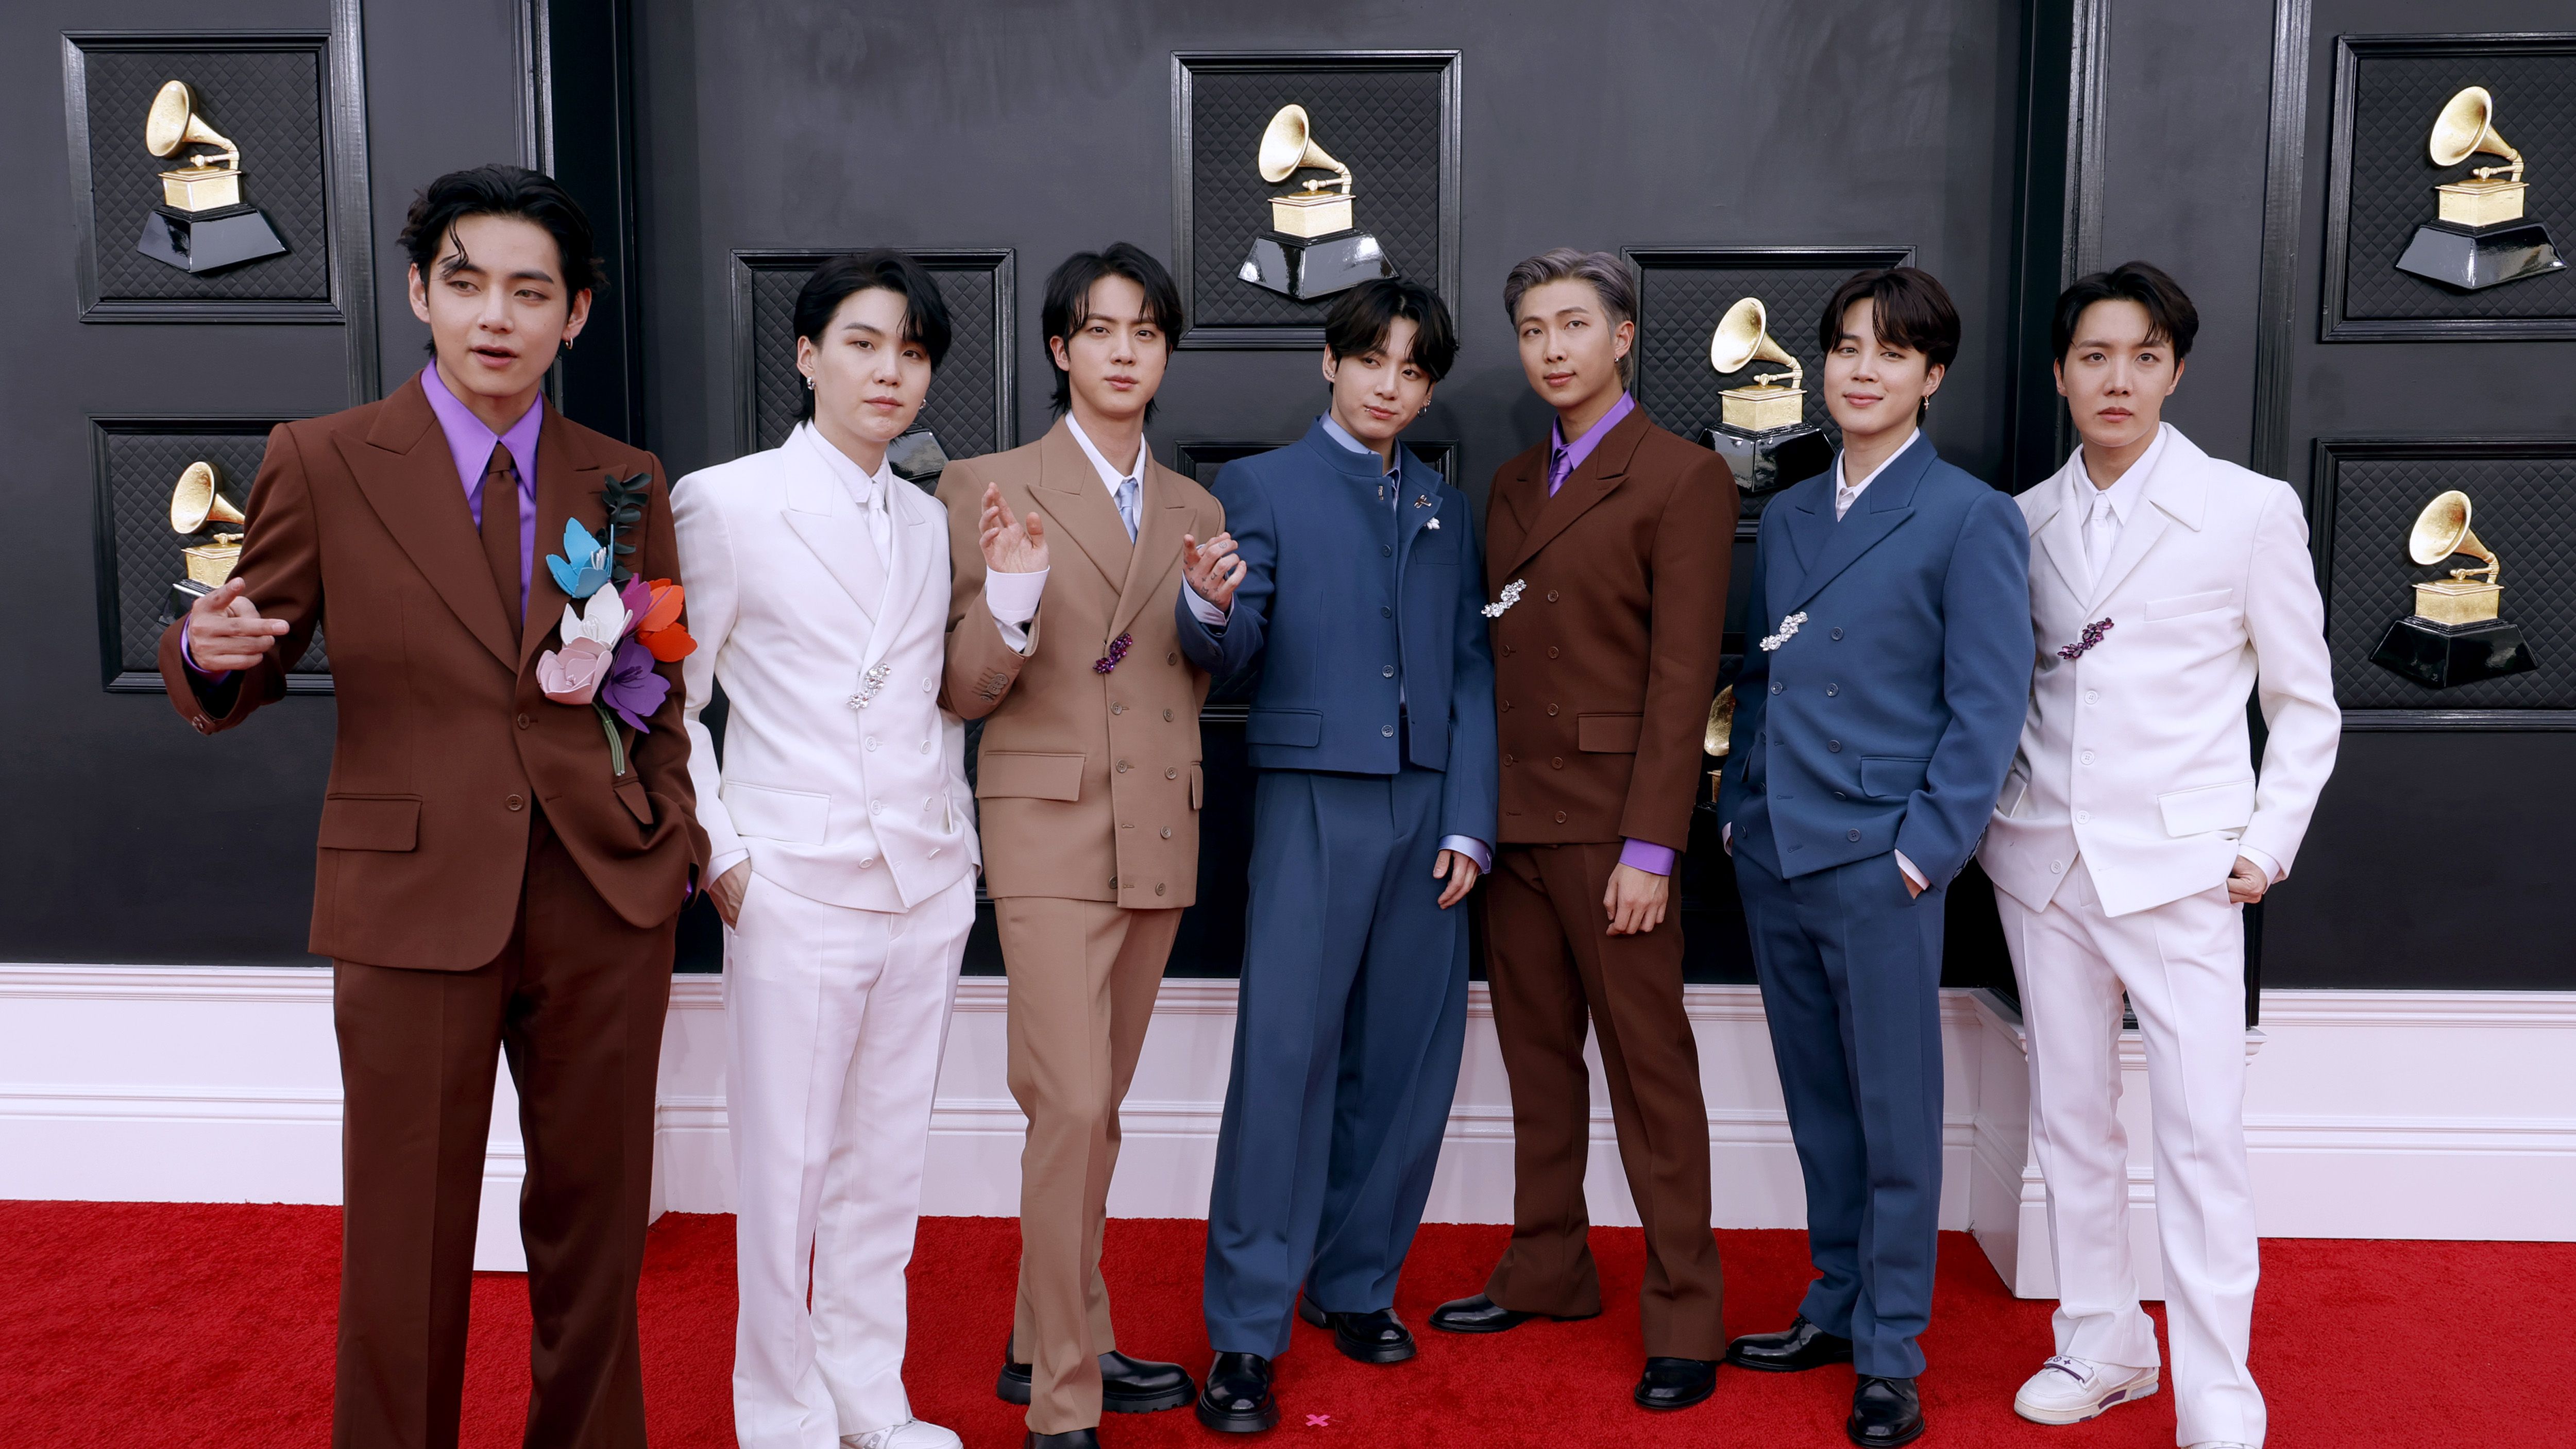 2022 Grammy Awards: Every Red Carpet Fashion Look